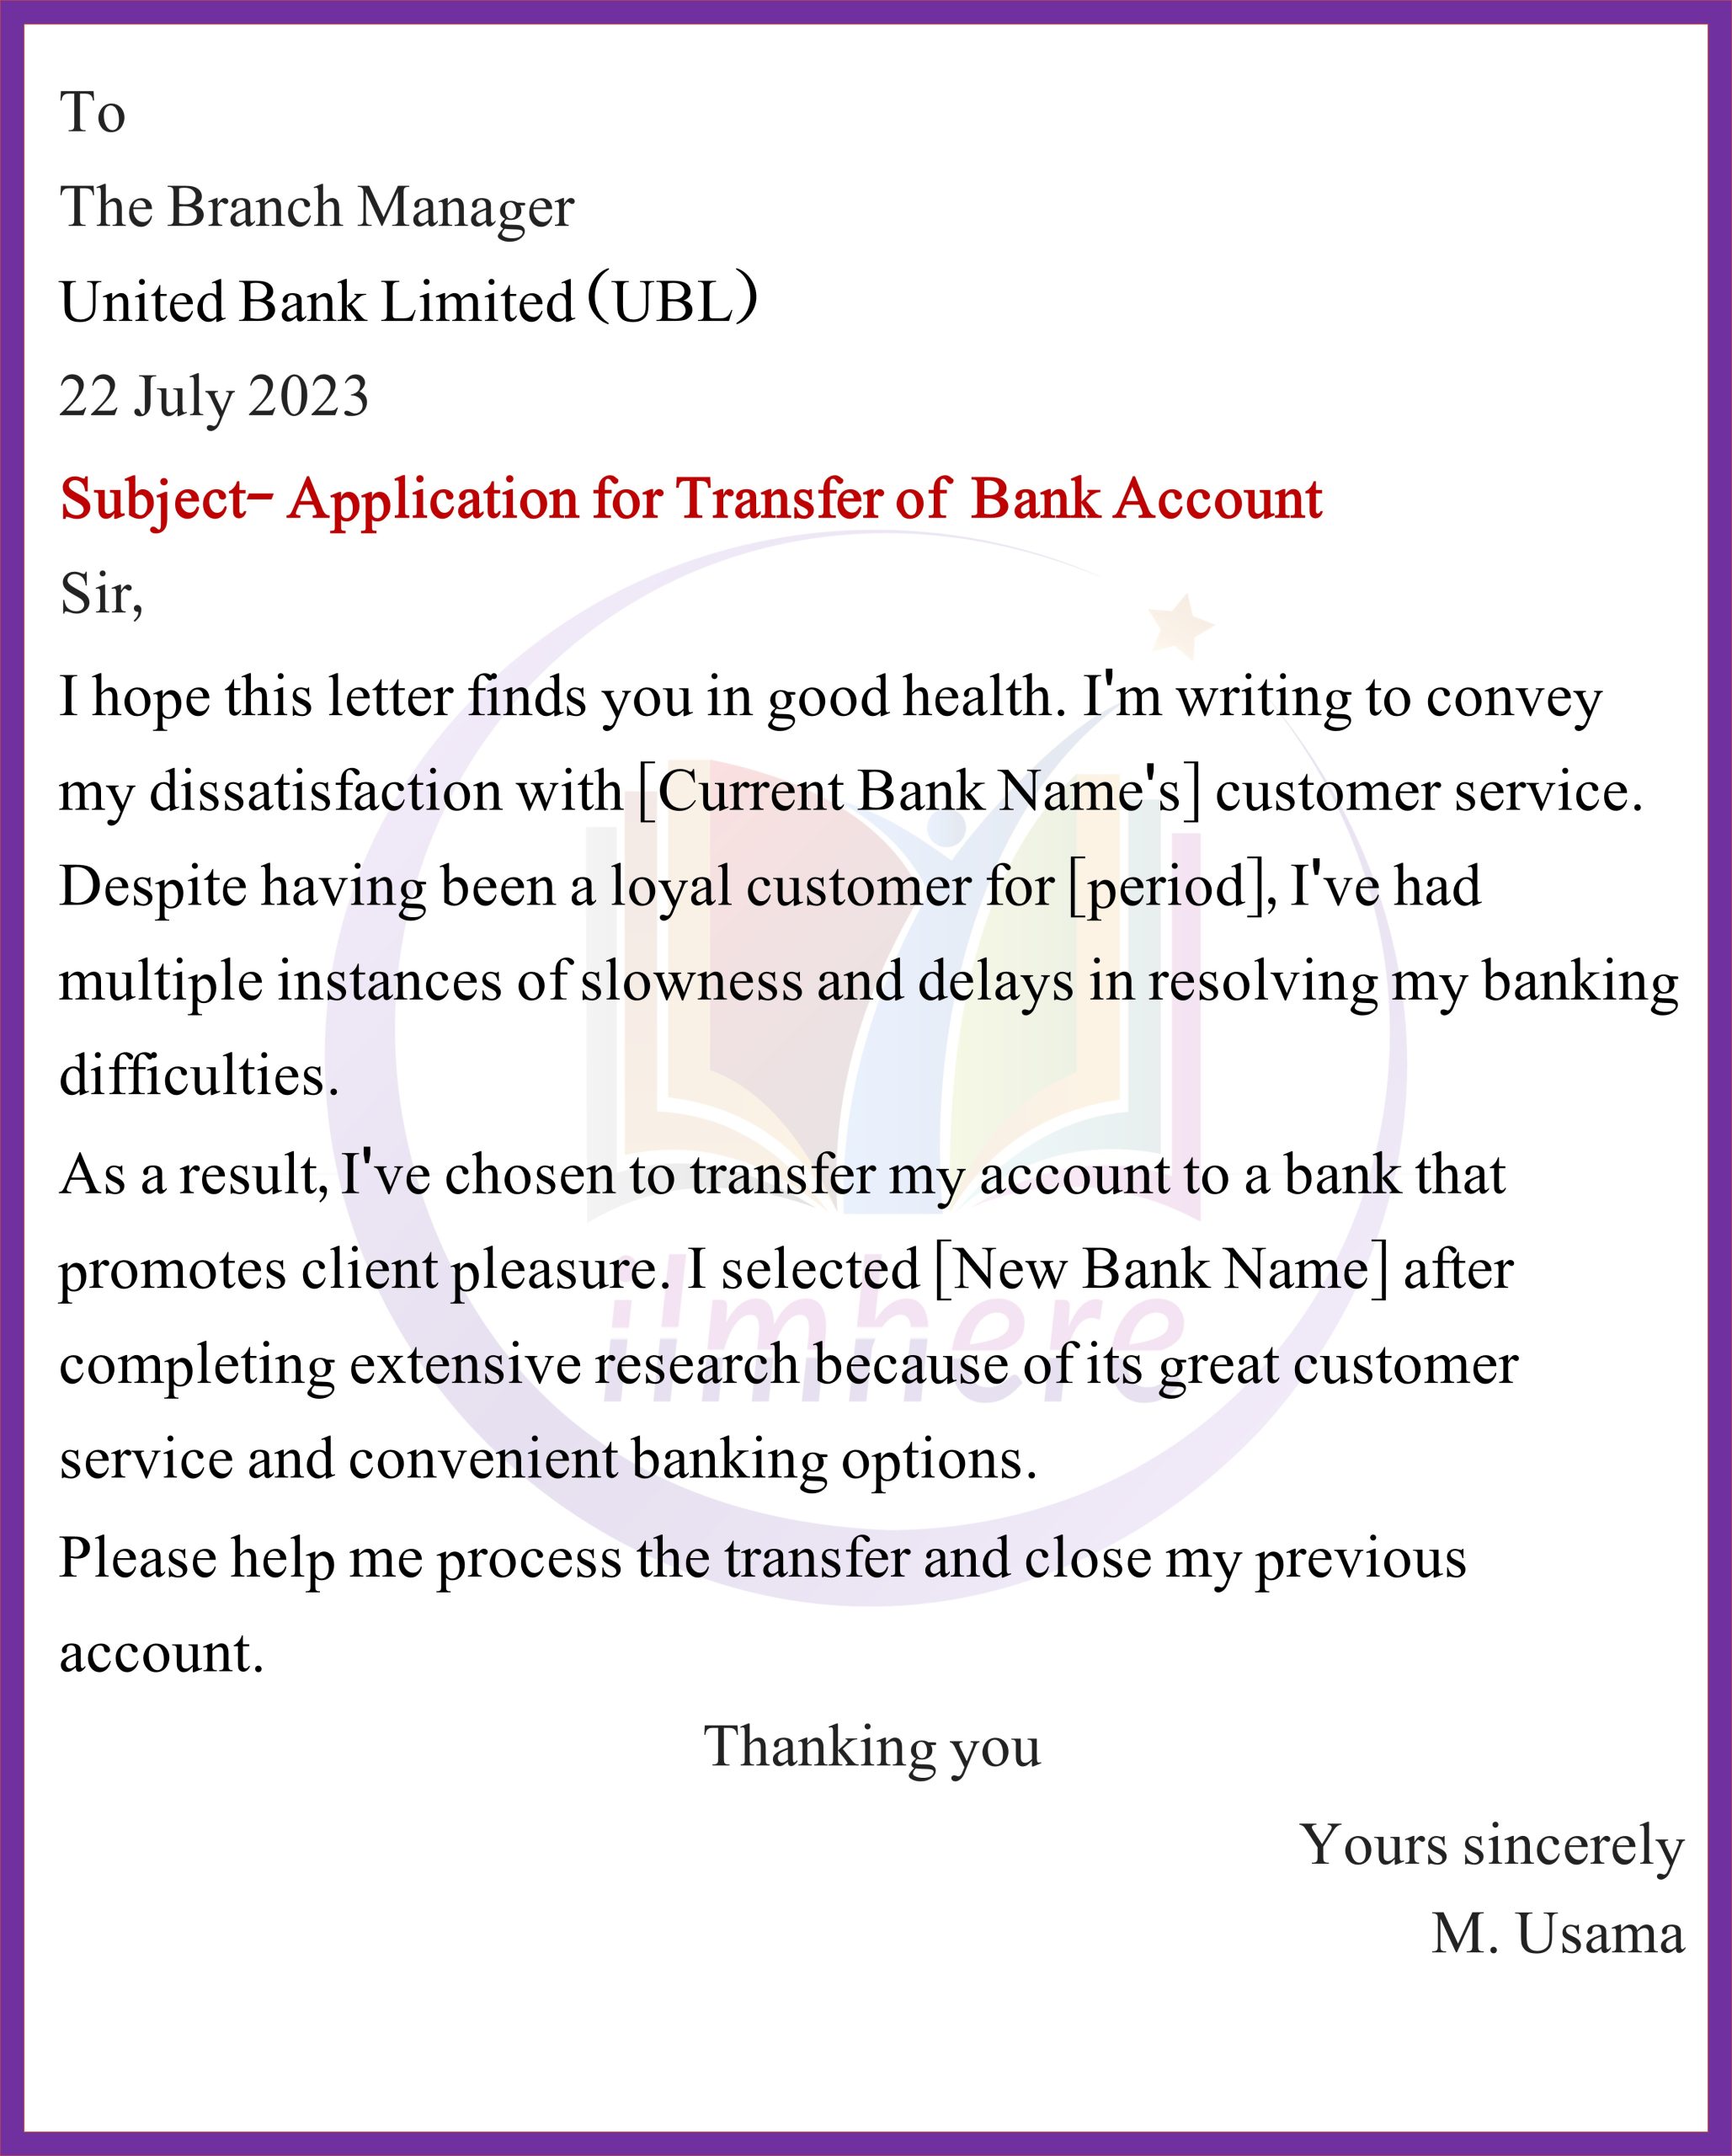 Request for Bank Account Transfer to Avail Better Interest Rates (UBL)